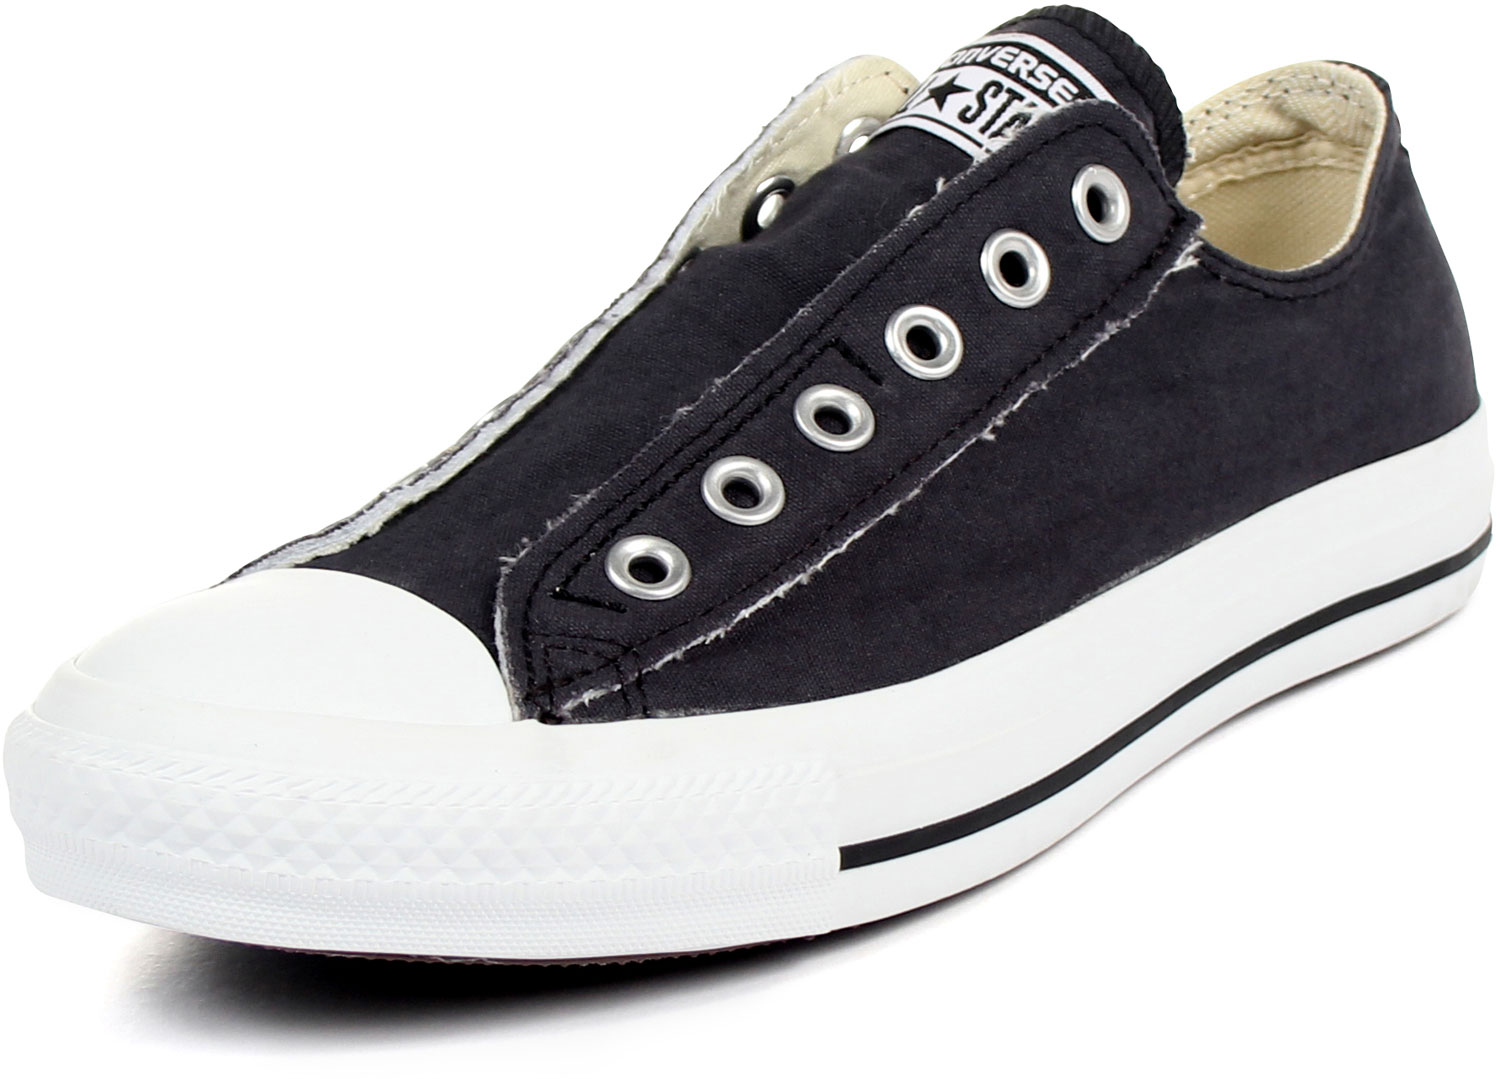 Converse Chuck Taylor Slip On Shoes in Black (IT366)